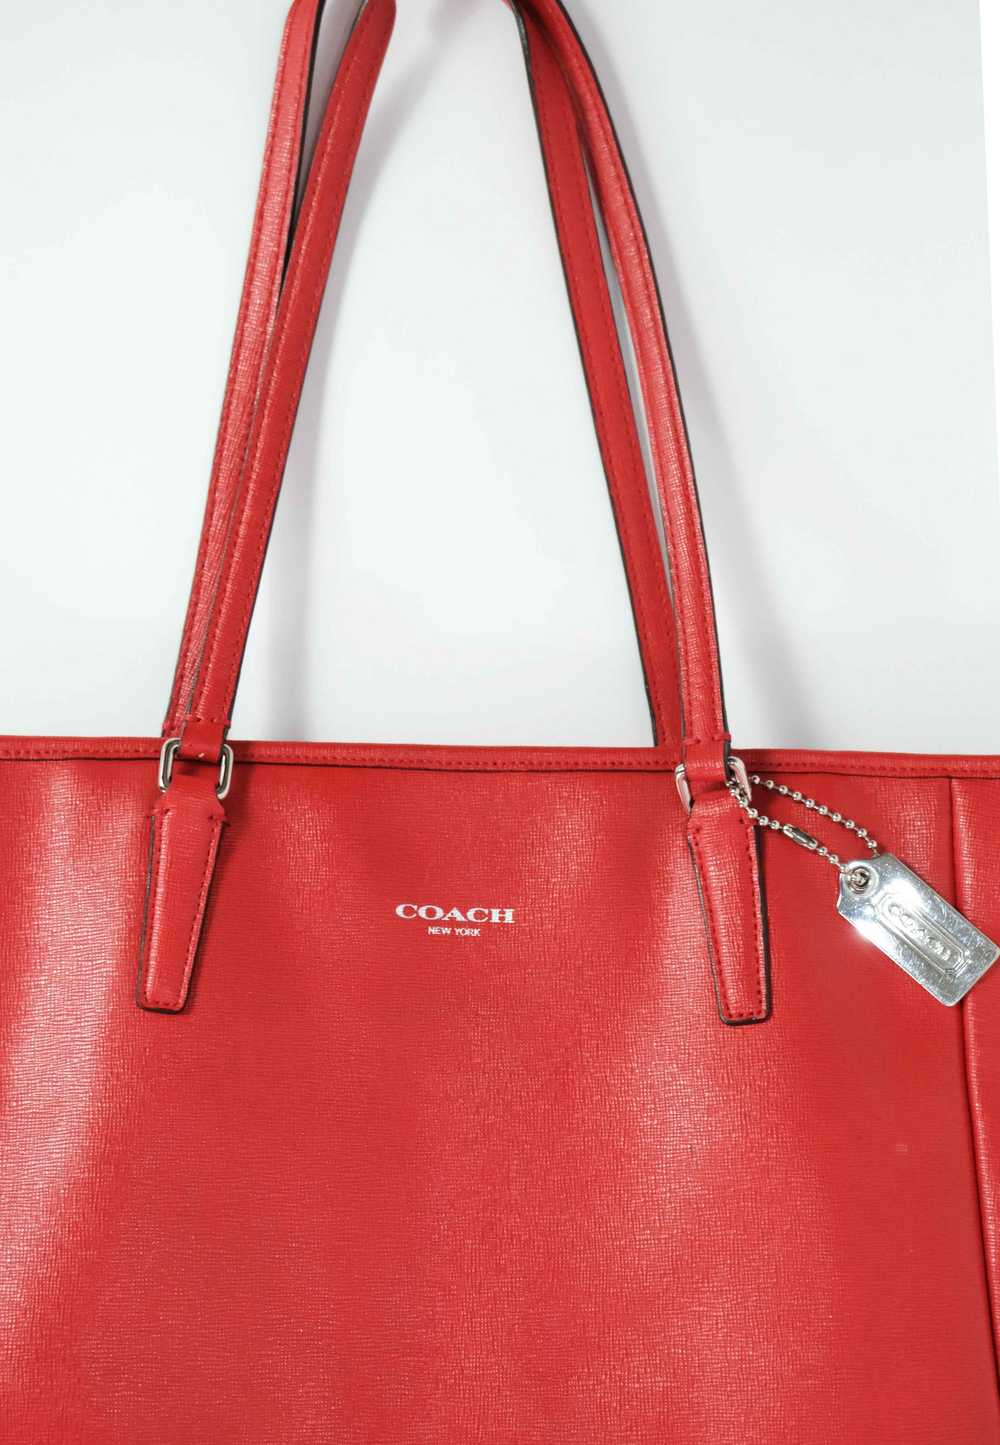 Cherry Red Coach Tote - image 5